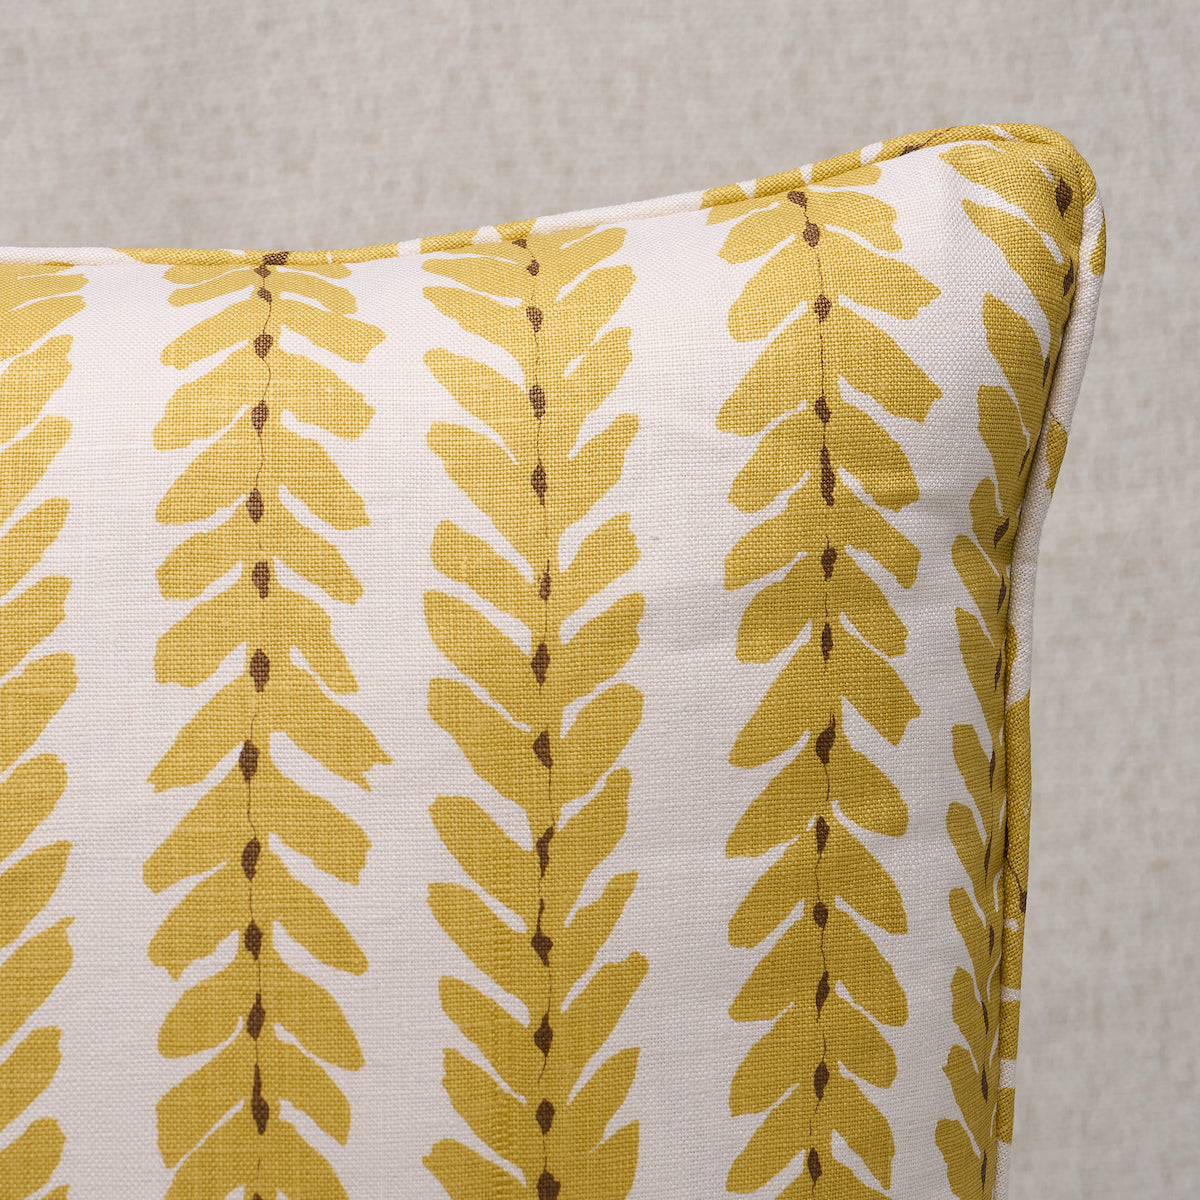 Woodperry Pillow | Mimosa